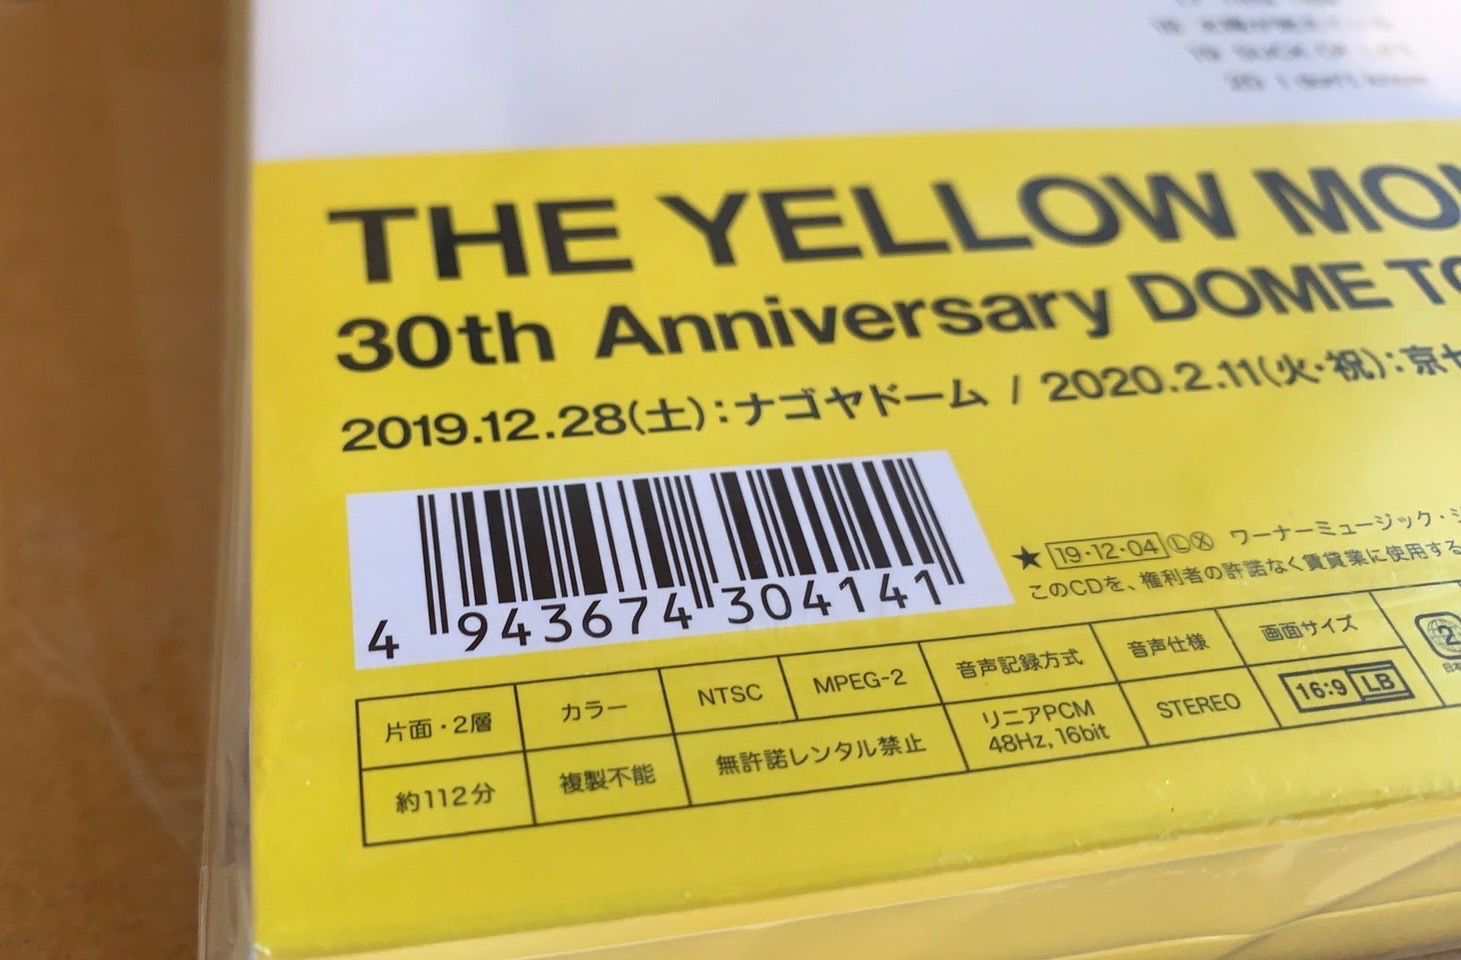 THE YELLOW MONKEY 30th Anniversary『9999+1』-GRATEFUL SPOONFUL 